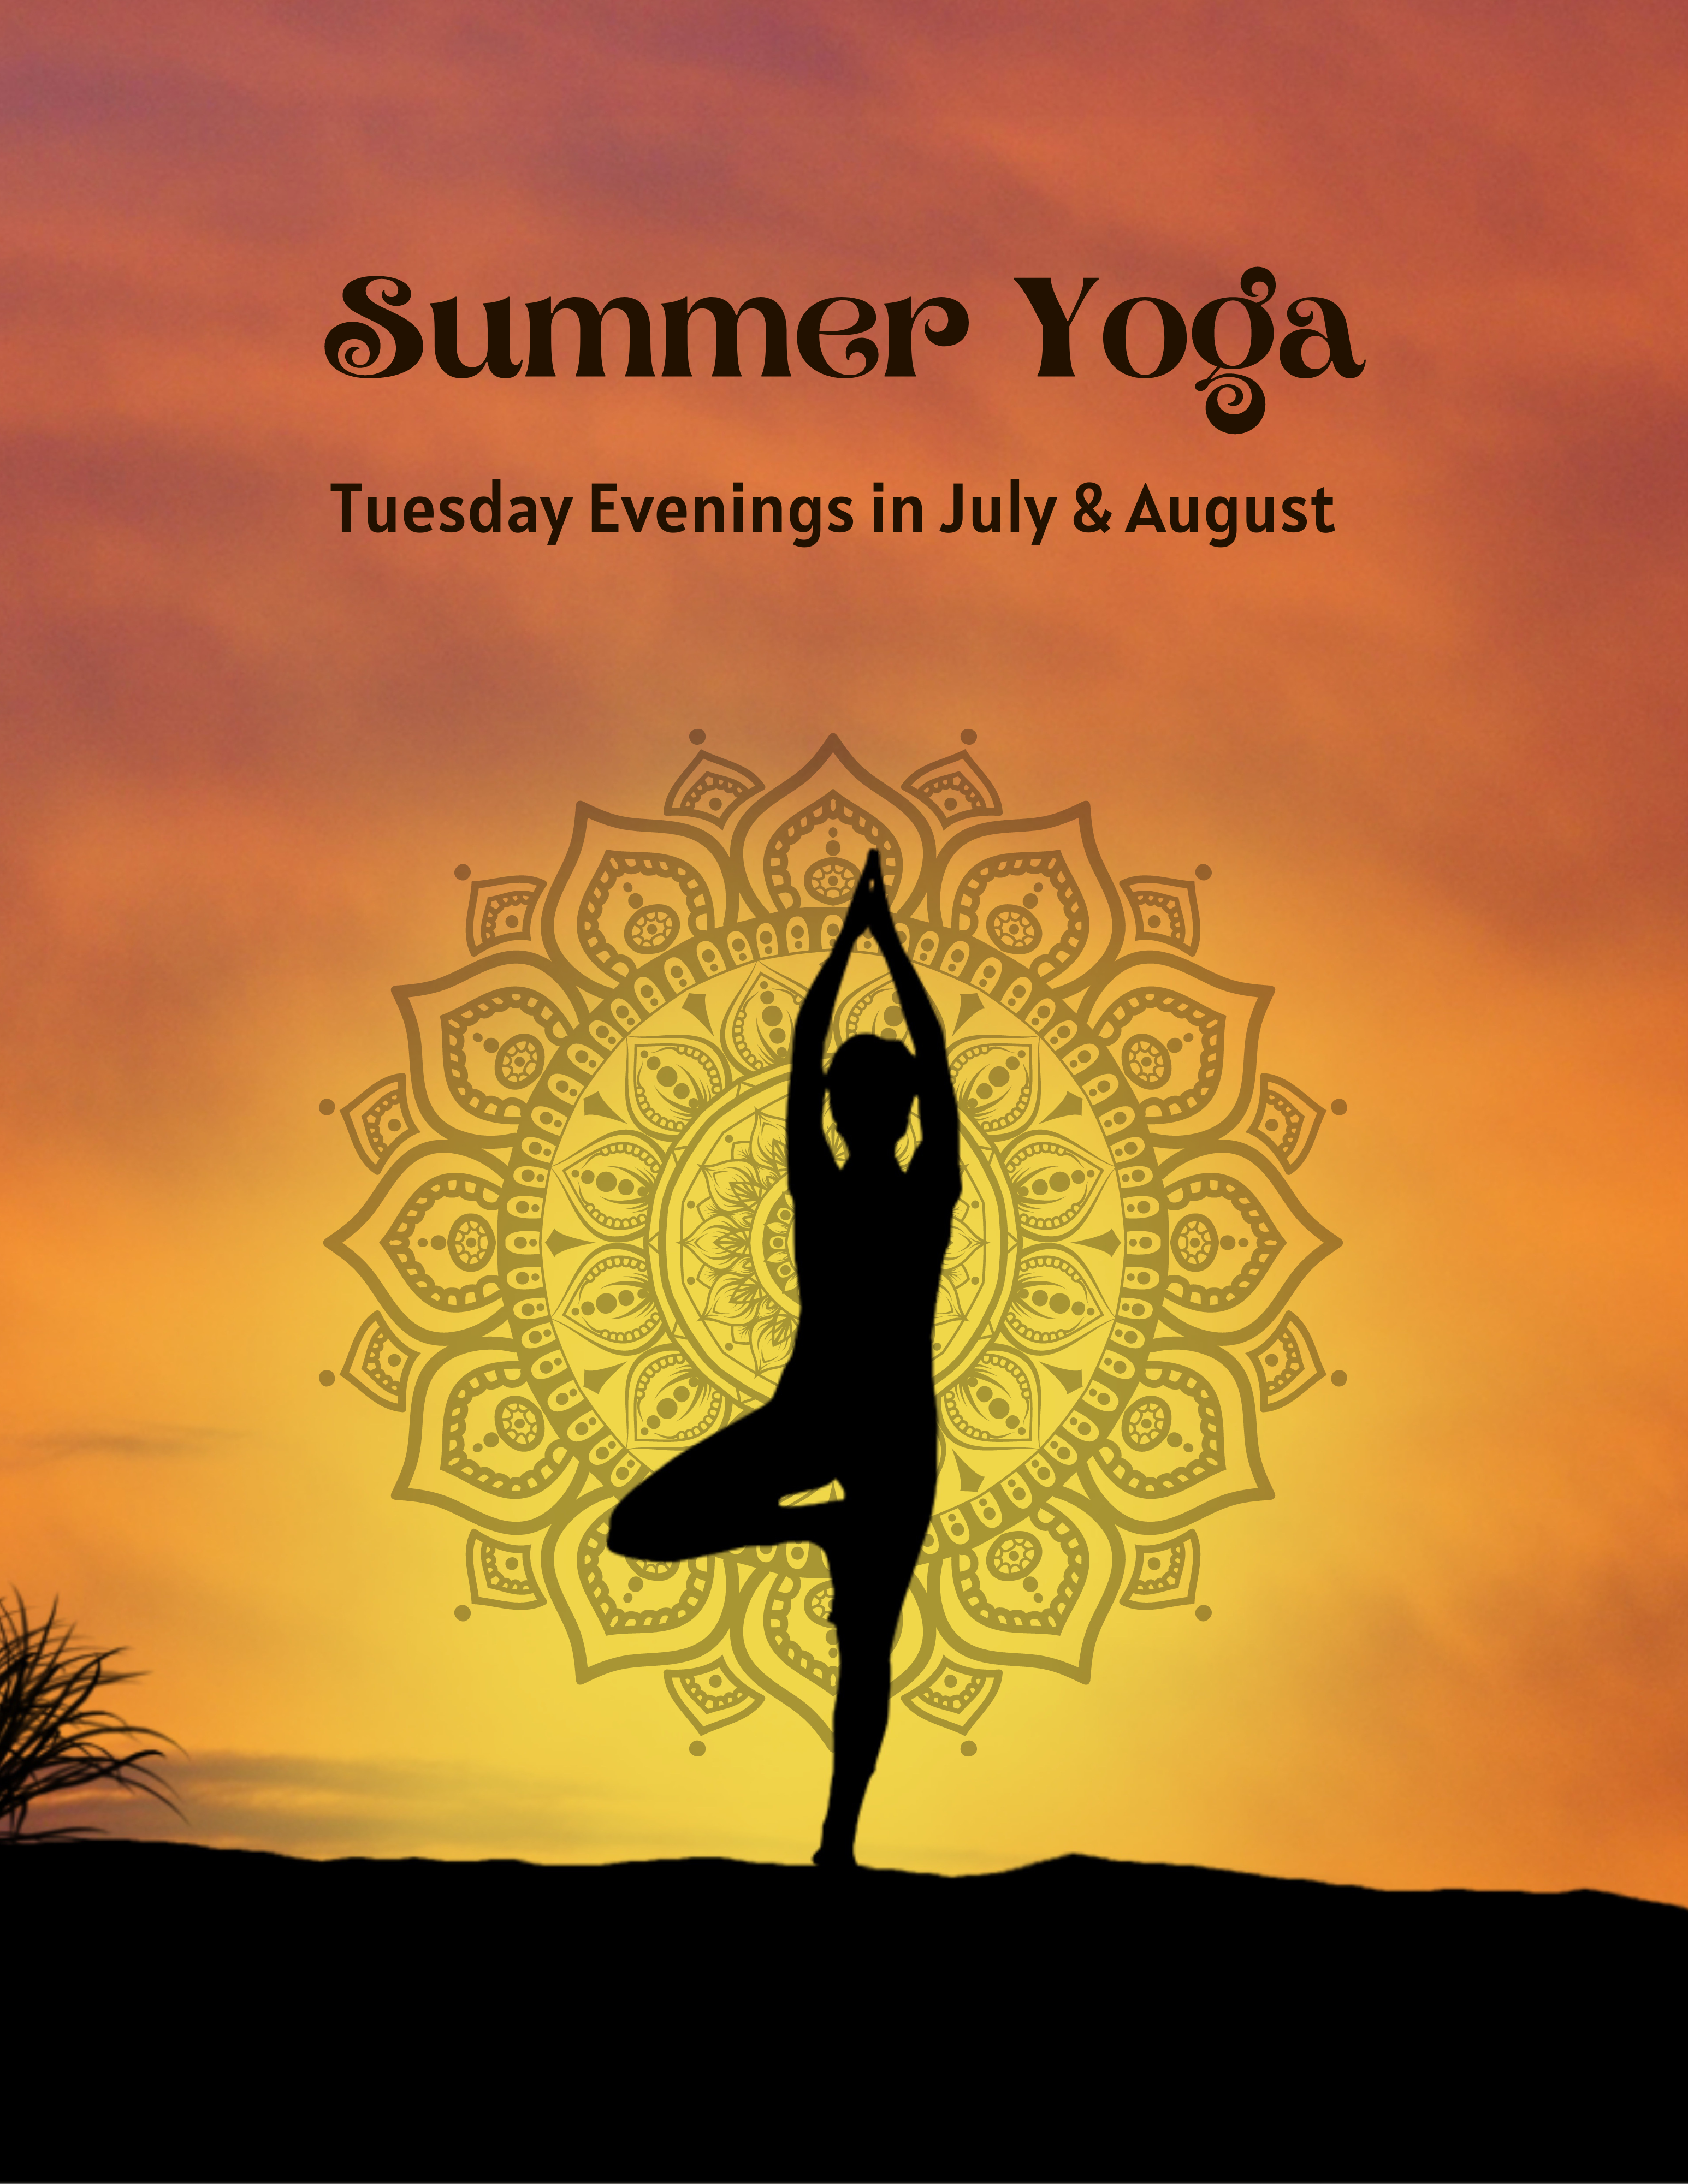 Summer Yoga Tuesday Evenings in July and August